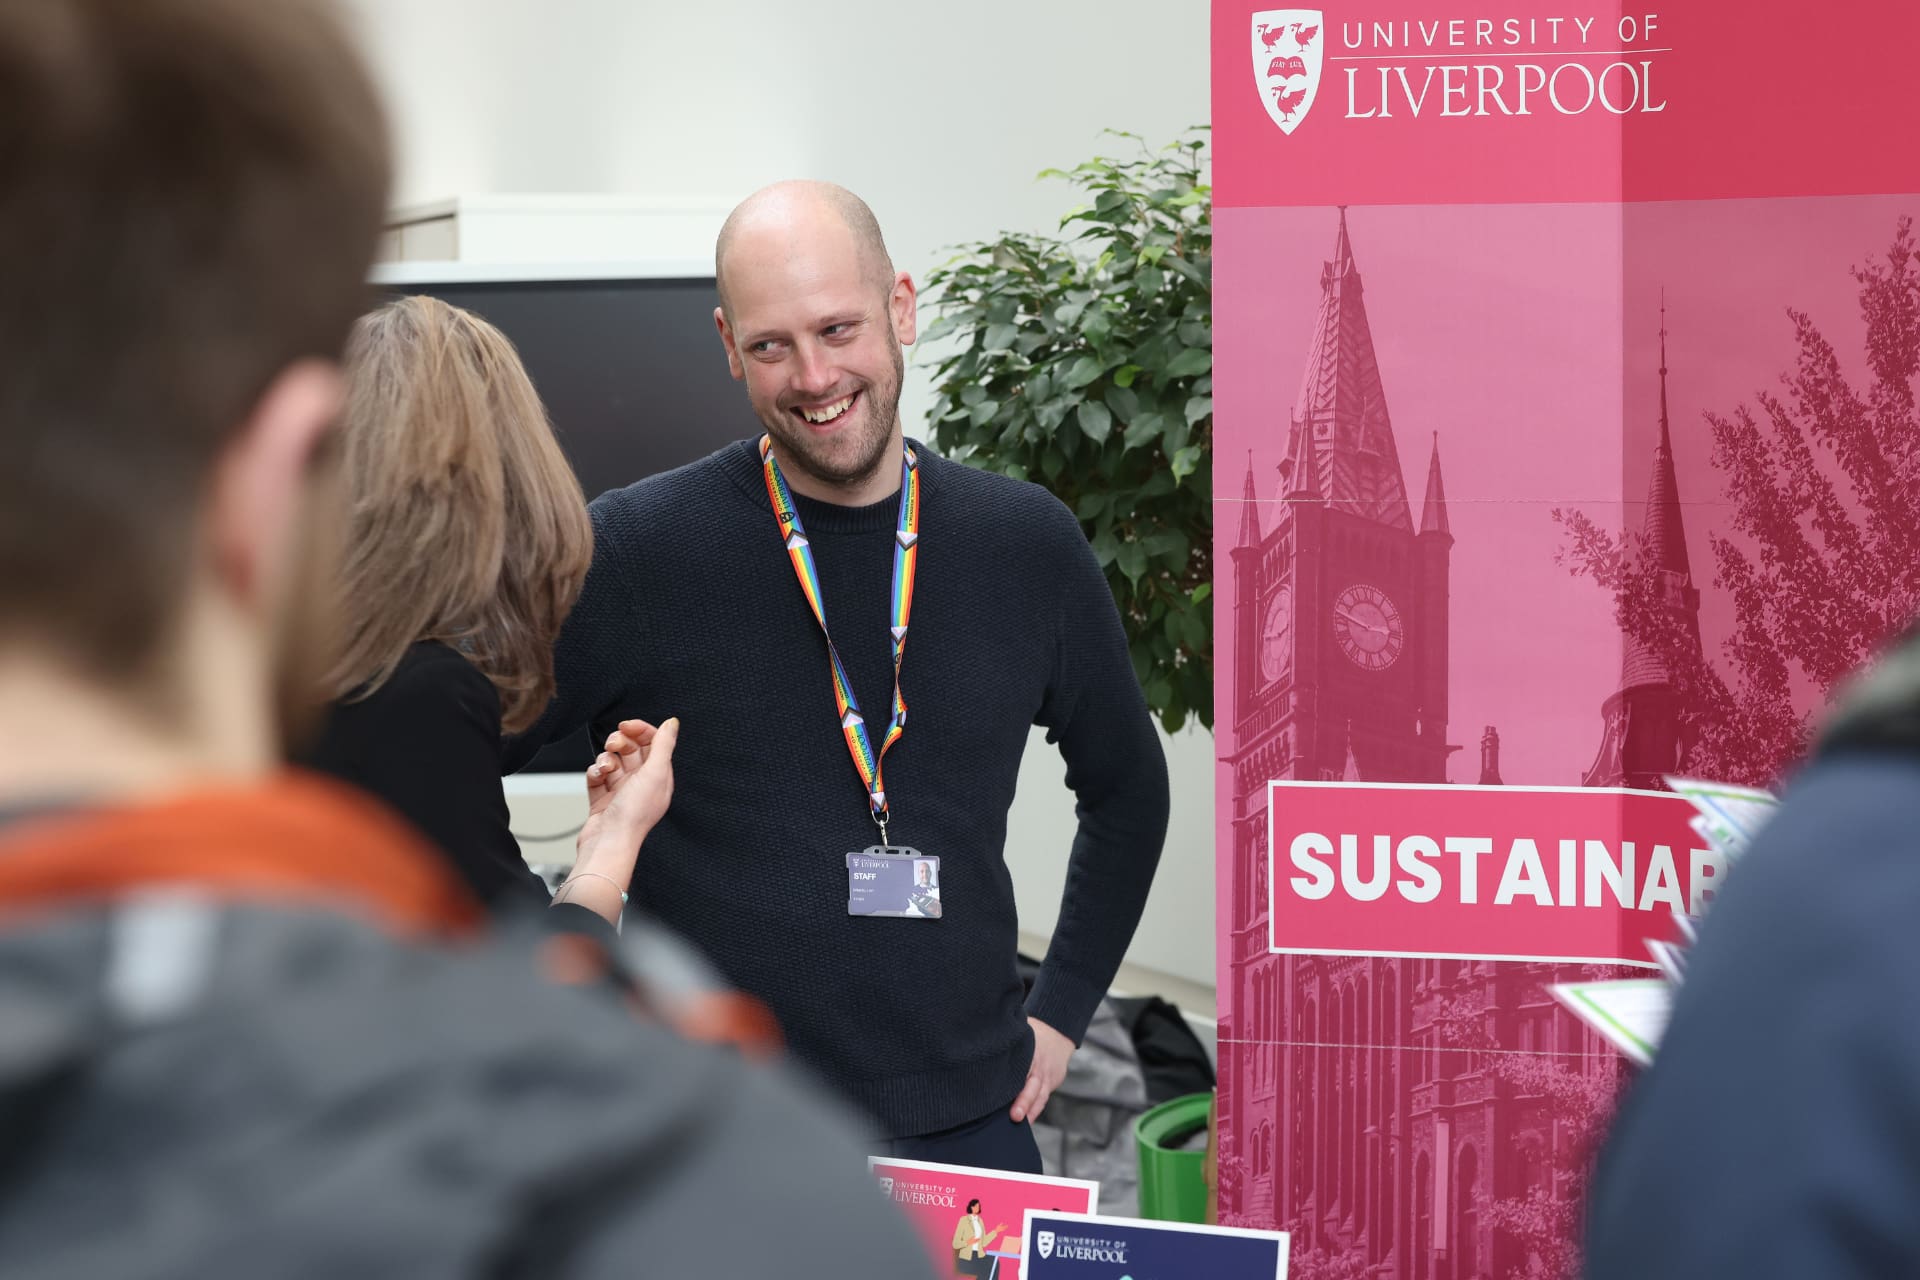 An employee of the sustainability team talking with staff and students.